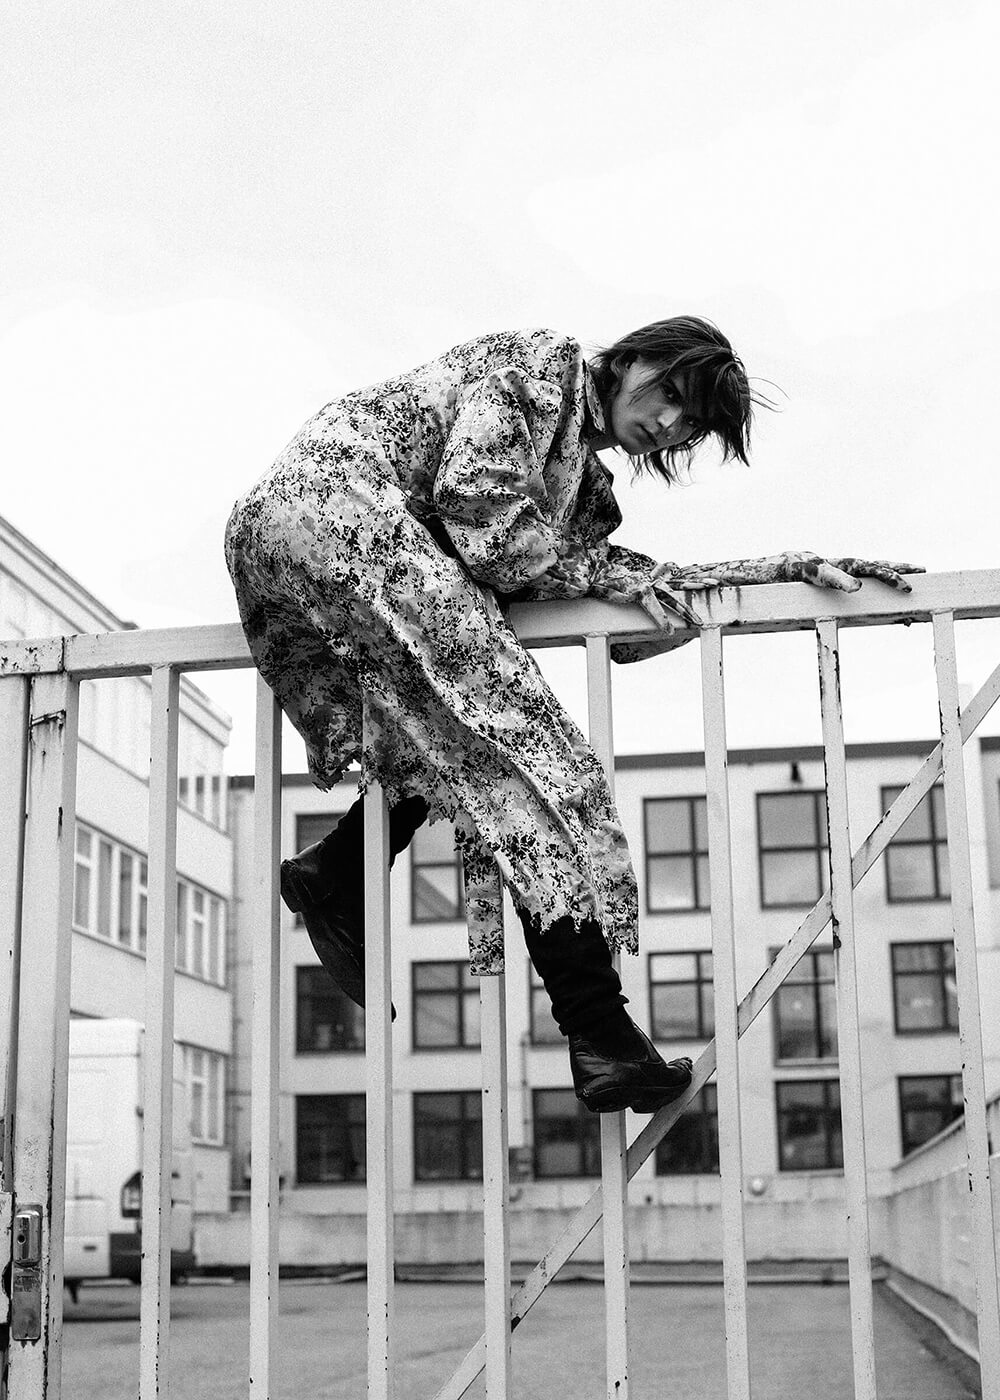 A black and white portrait of a young punk man climbing over a fence